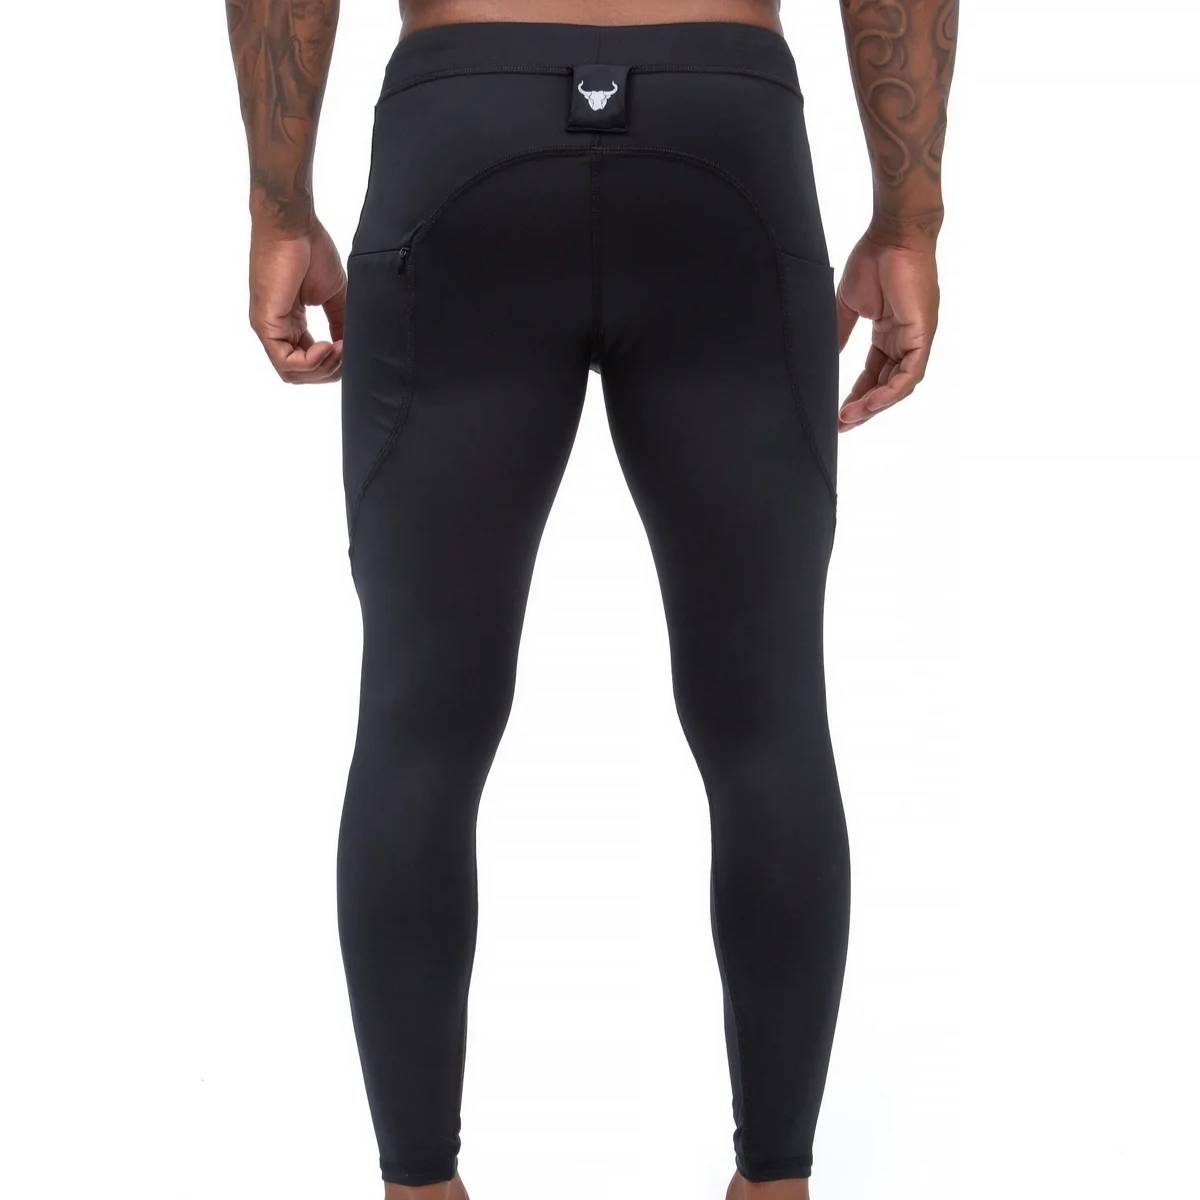 Men: wear tights while you work out, ditch the shorts, and live free! -  9Coach